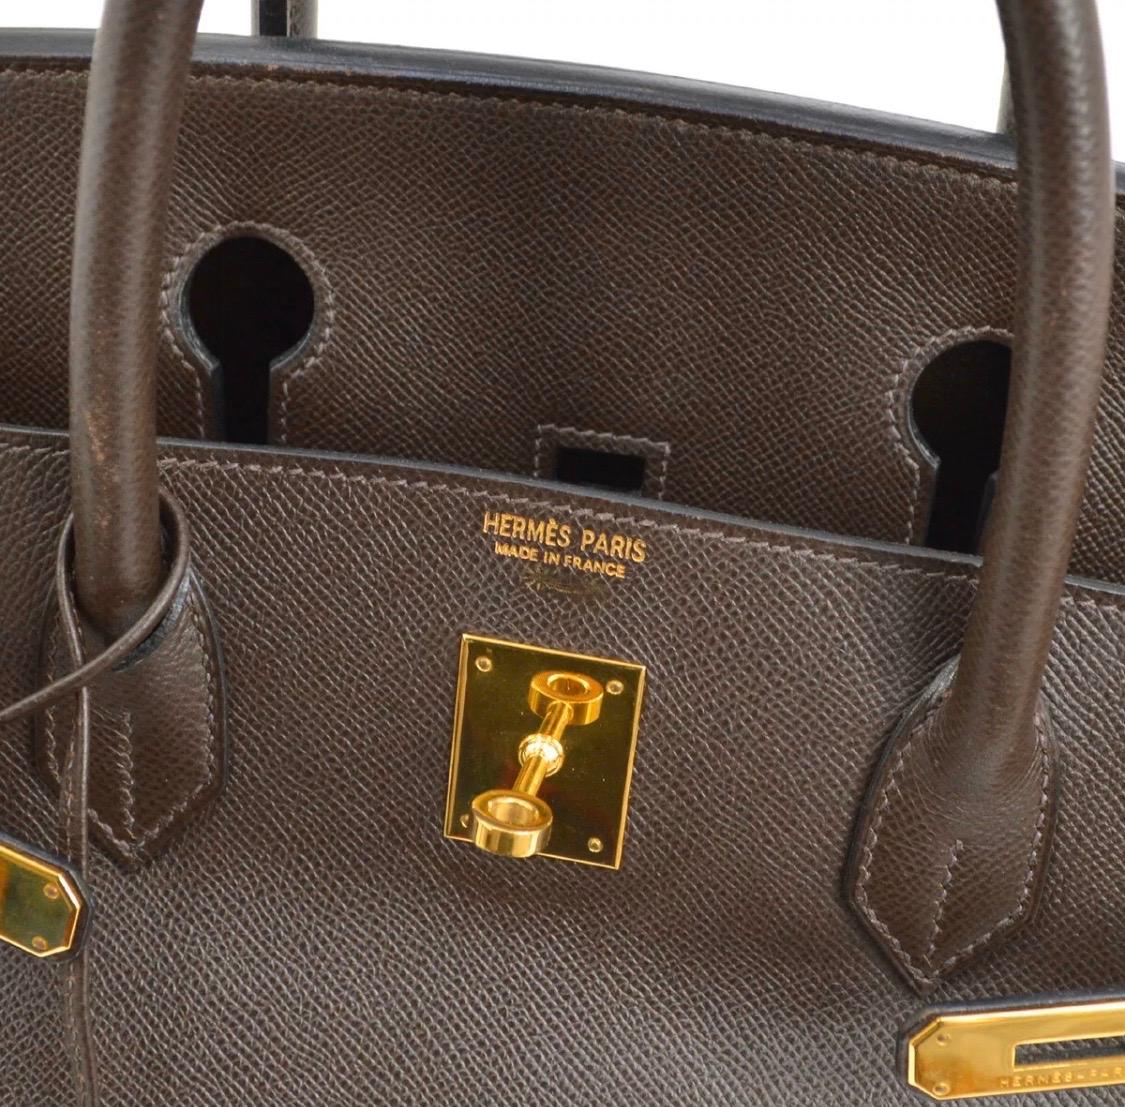 Hermes Birkin 40 Brown Leather Gold Carryall Travel Top Handle Satchel Tote

Leather
Gold tone hardware
Leather lining
Date code present
Made in France
Handle drop 4.25